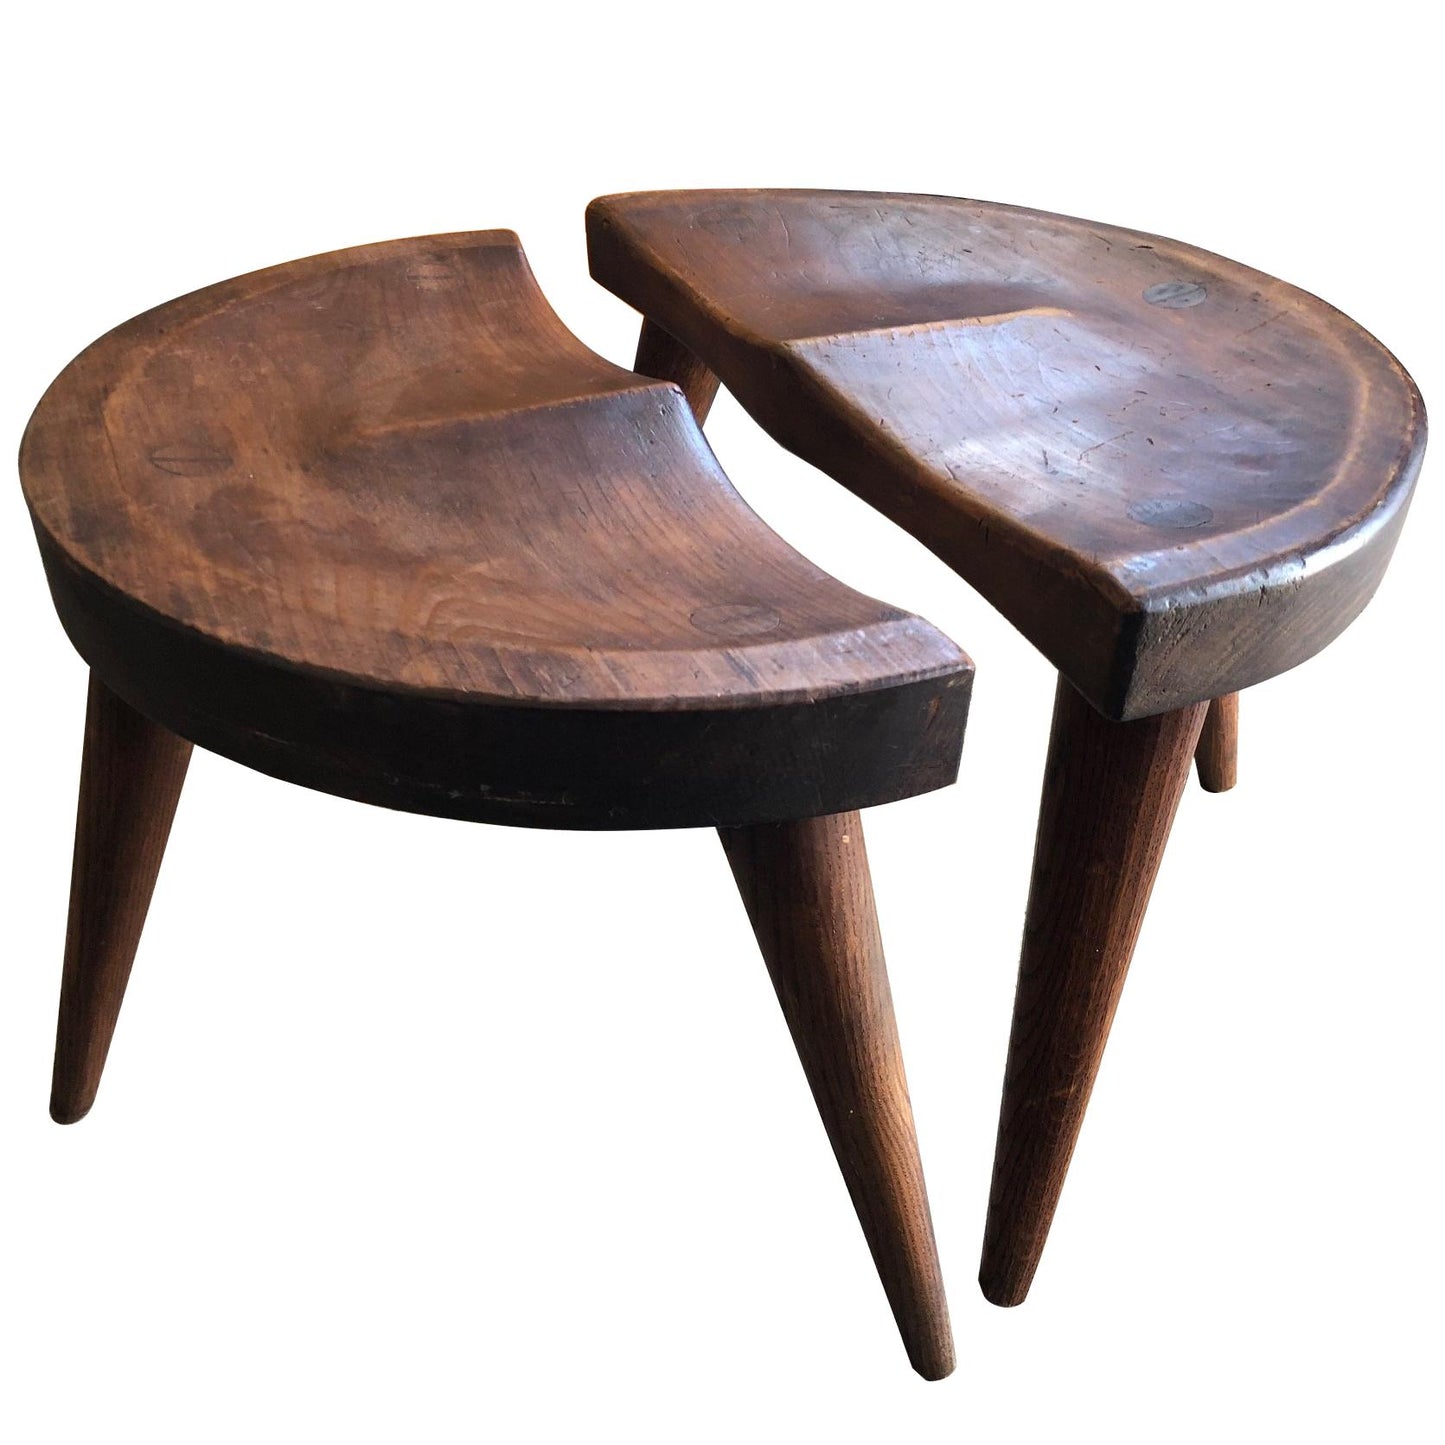 Pair of Low Stools by Arthur Cunningham New Hampshire Craftsman